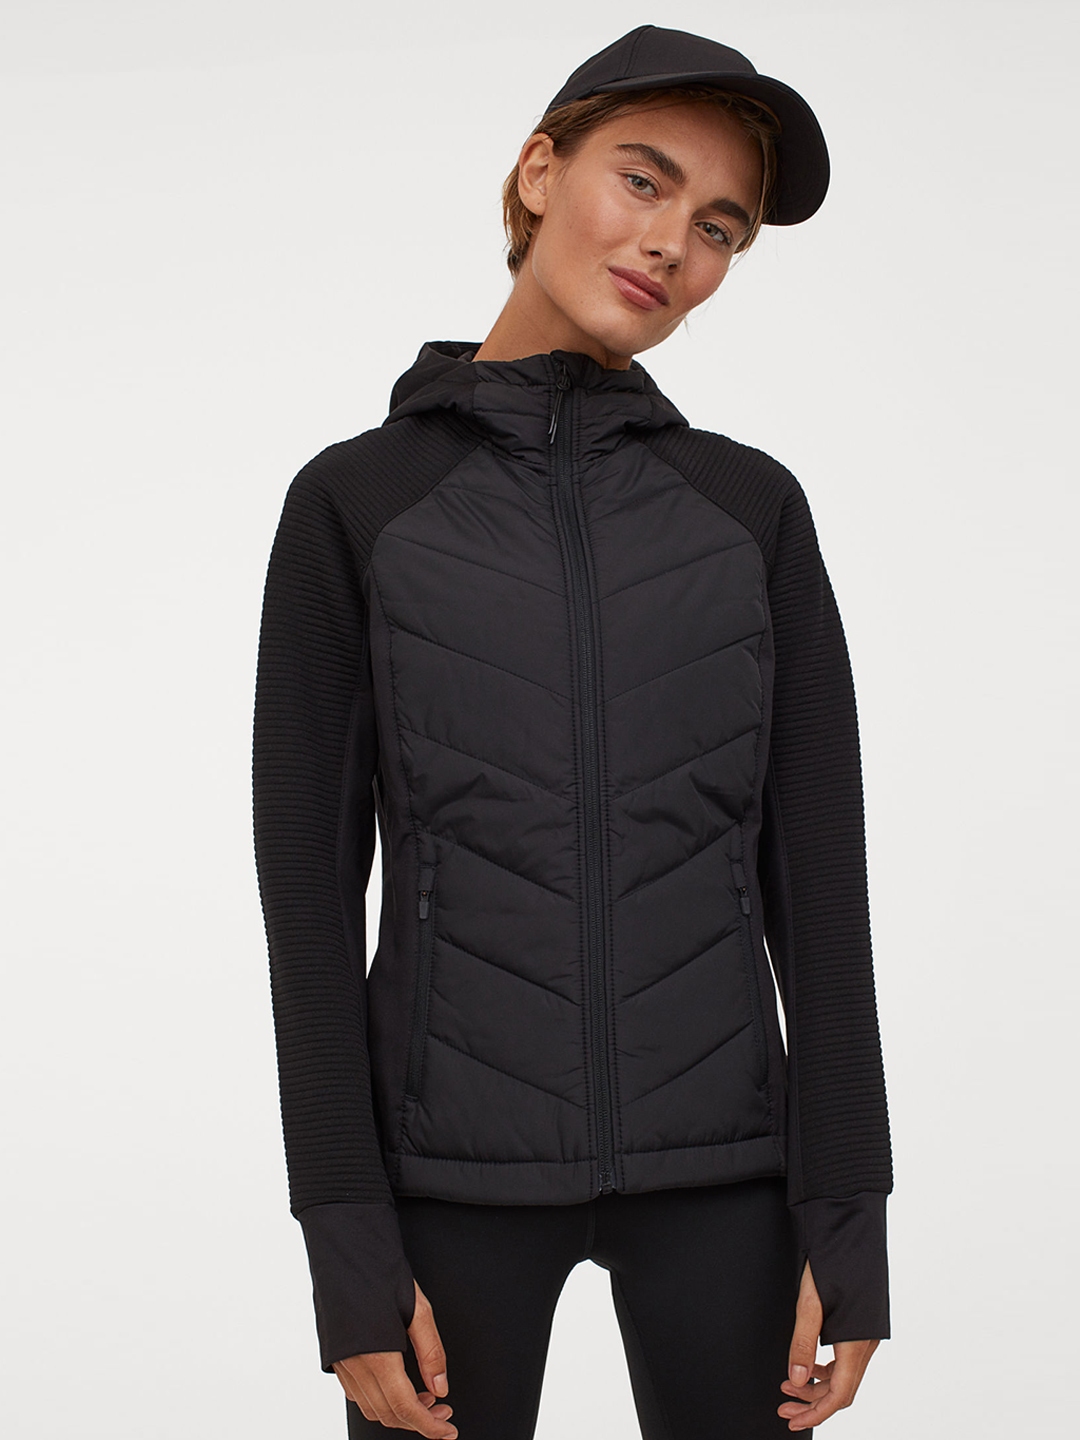 Buy H&M Women Black Solid Padded Hooded Outdoor Jacket - Jackets for Women 12155384 | Myntra